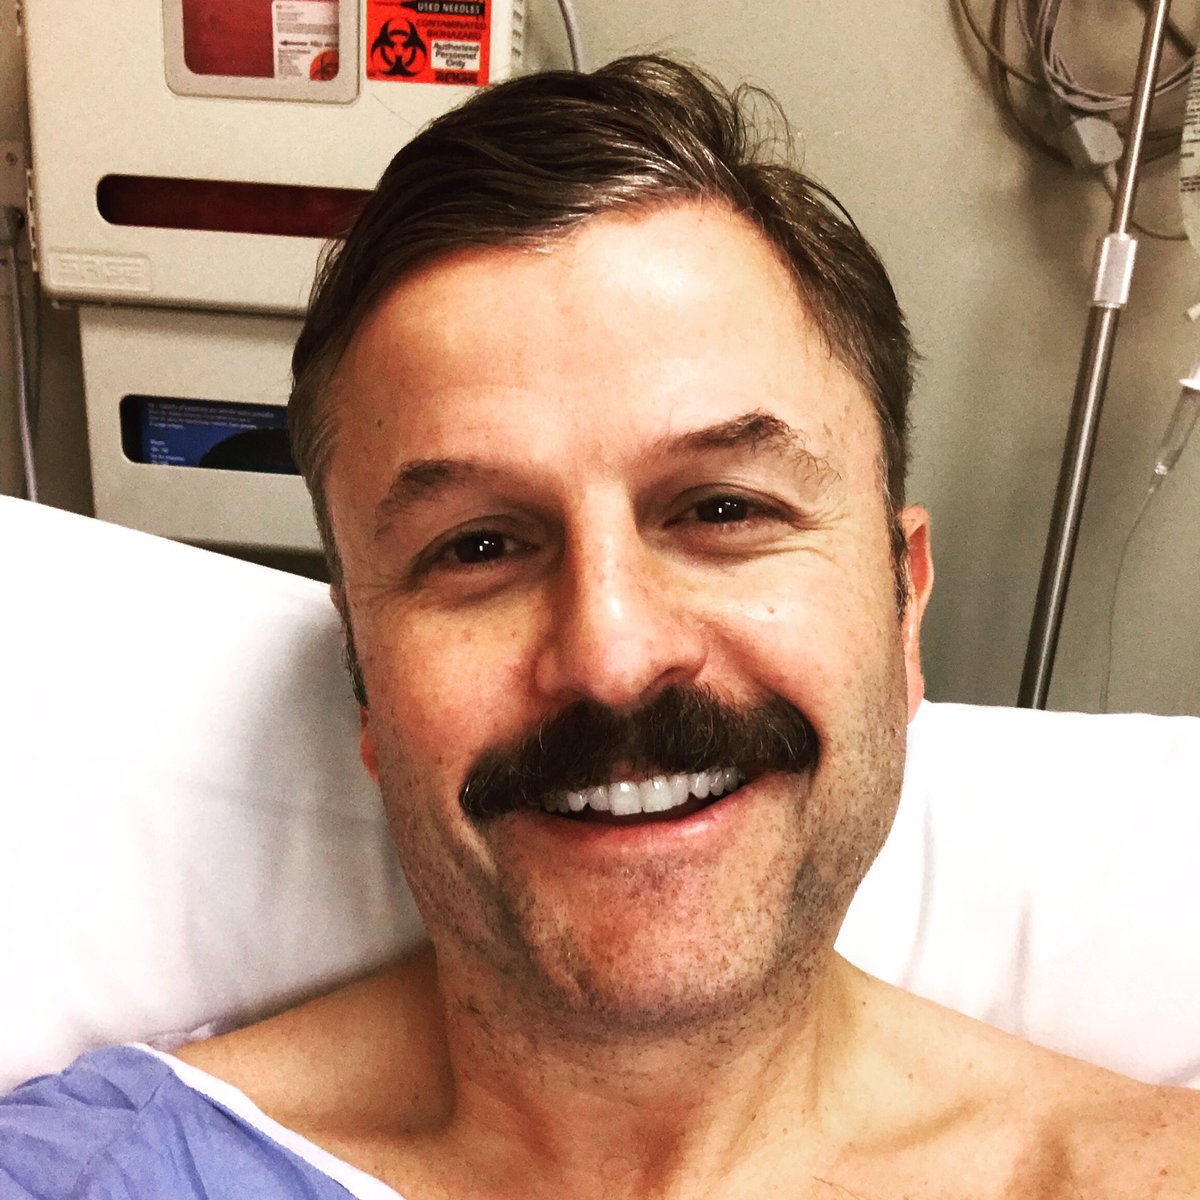 Steve Lemme on Twitter: "I've planned my surgery recovery ...